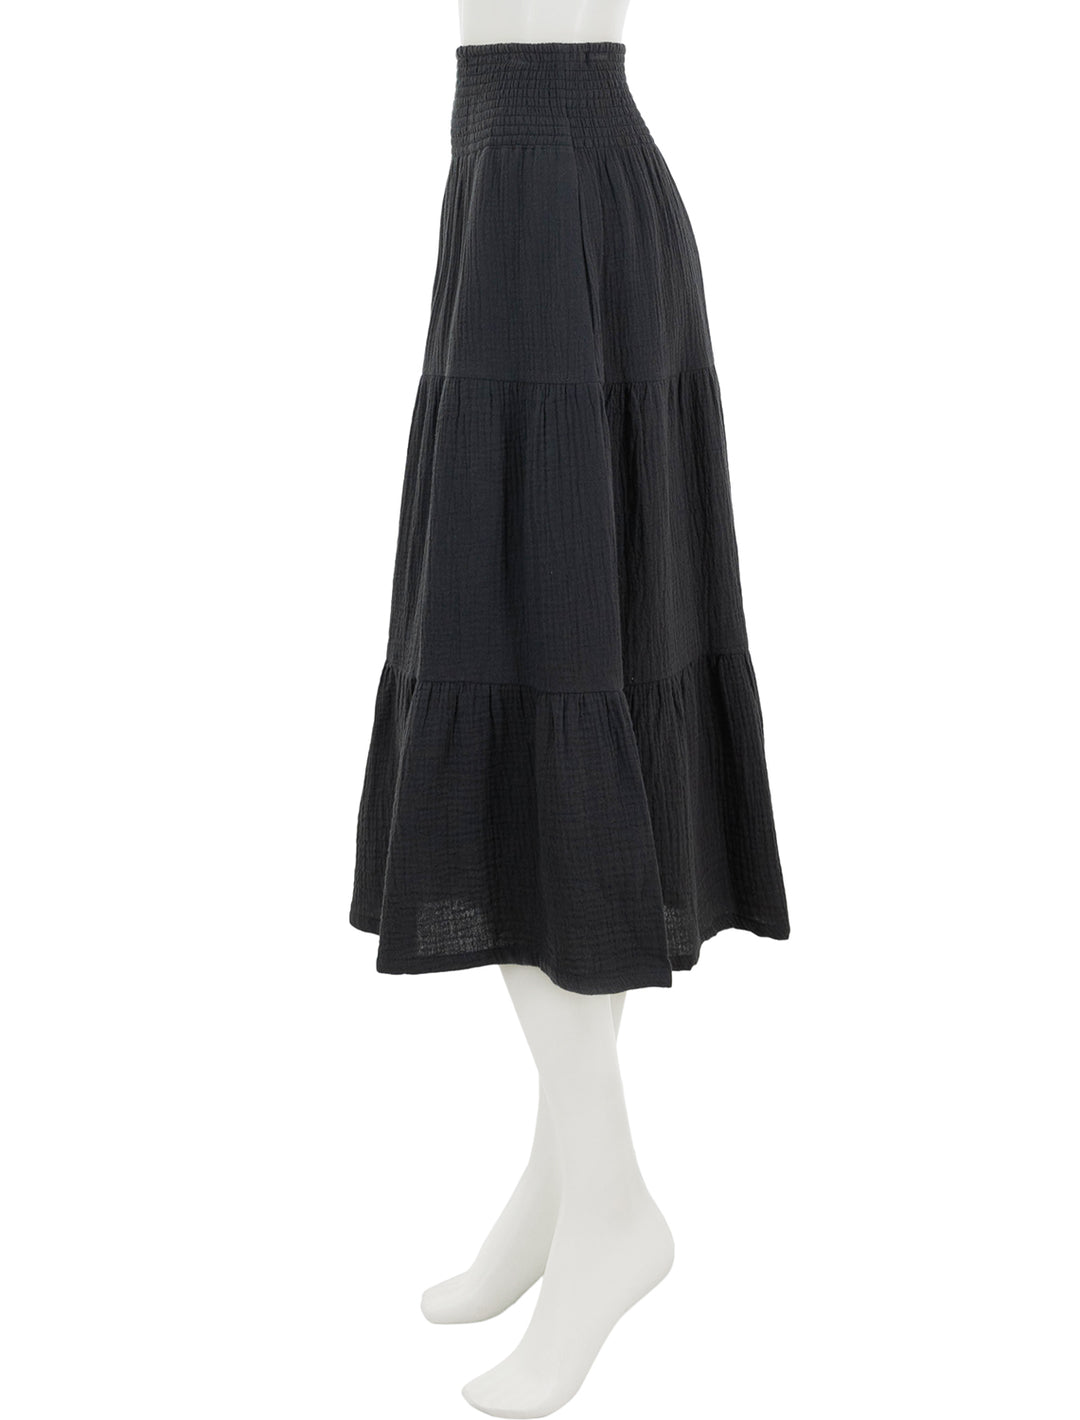 Side view of marine layer's corinne smocked waist maxi skirt in black.